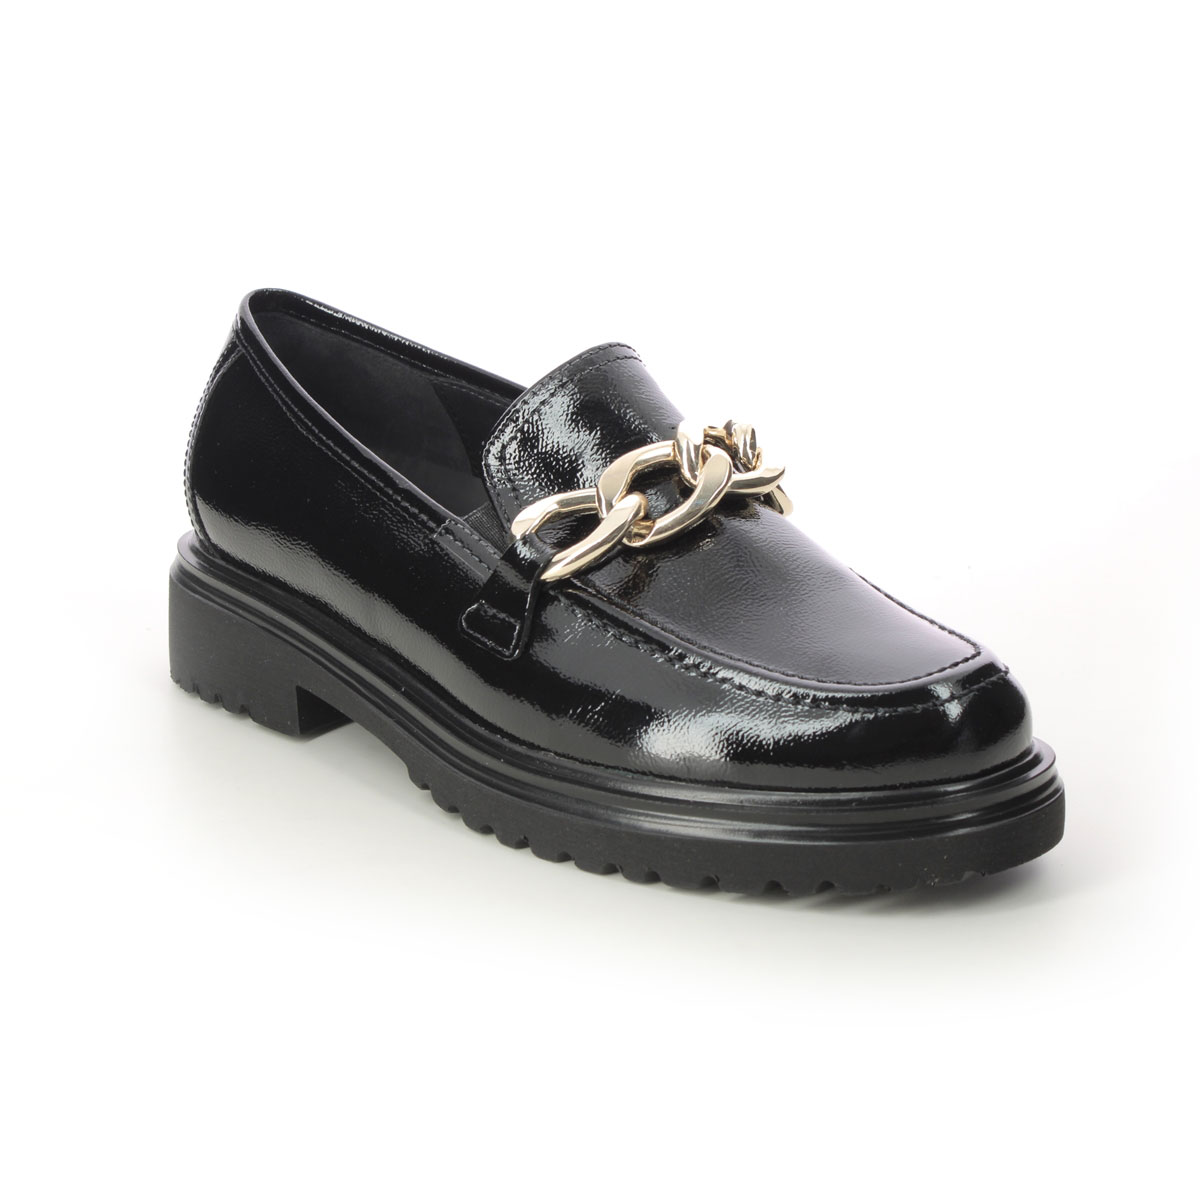 Gabor Florida H Black Patent Womens Loafers 92.554.97 In Size 3.5 In Plain Black Patent  Womens Comfort Slip On Shoes In Soft Black Patent Leather